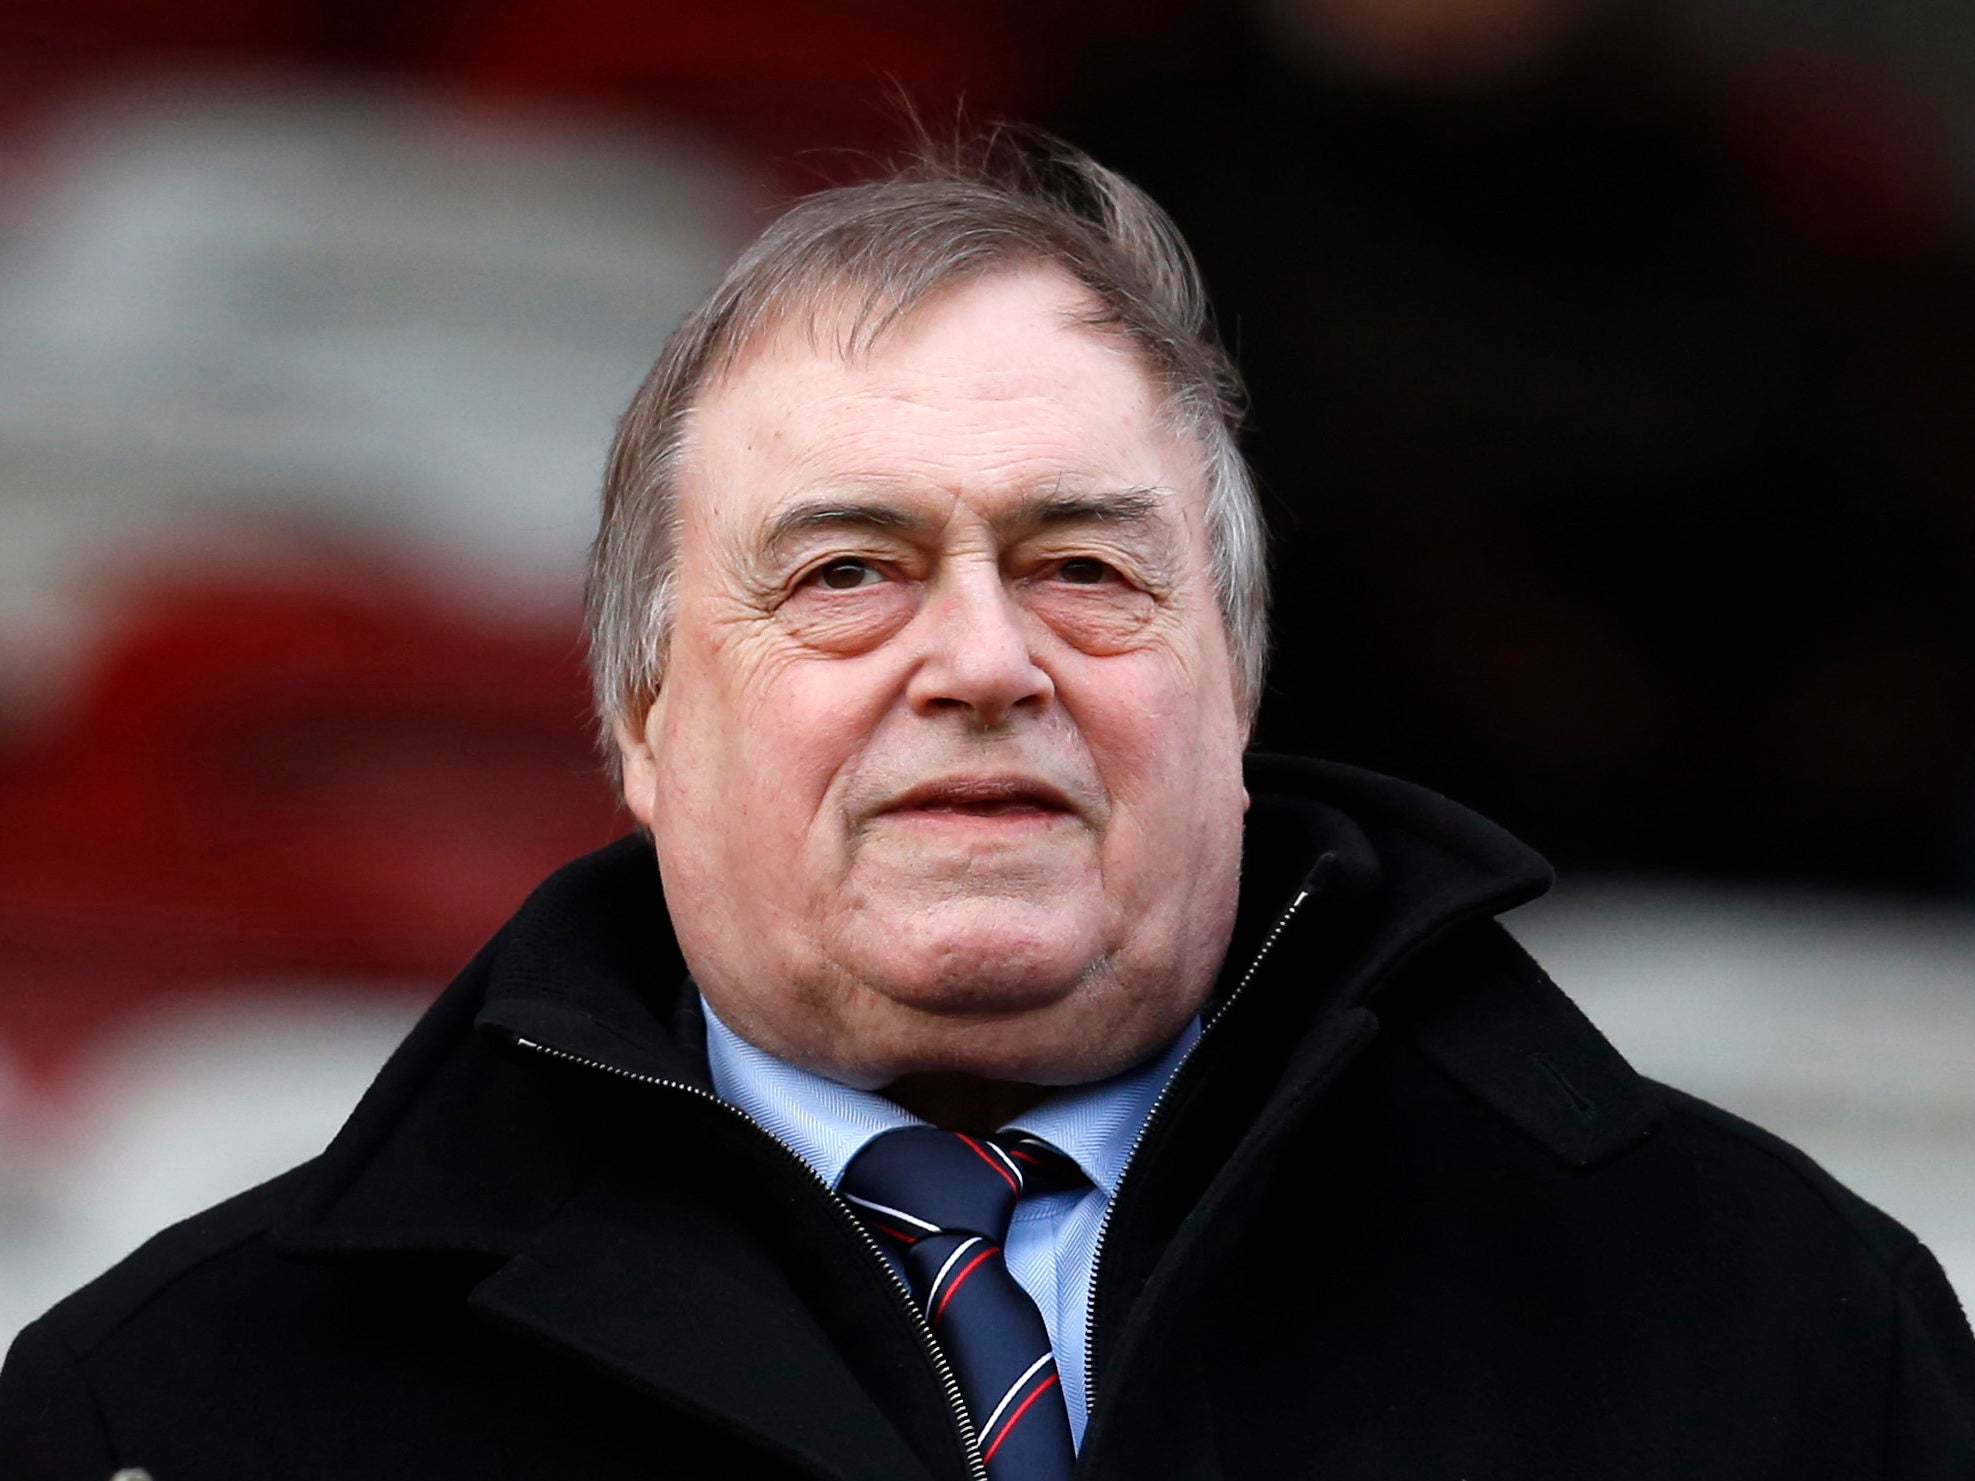 John Prescott's Sunday Mirror column axed after five years due to 'cutbacks' at the paper